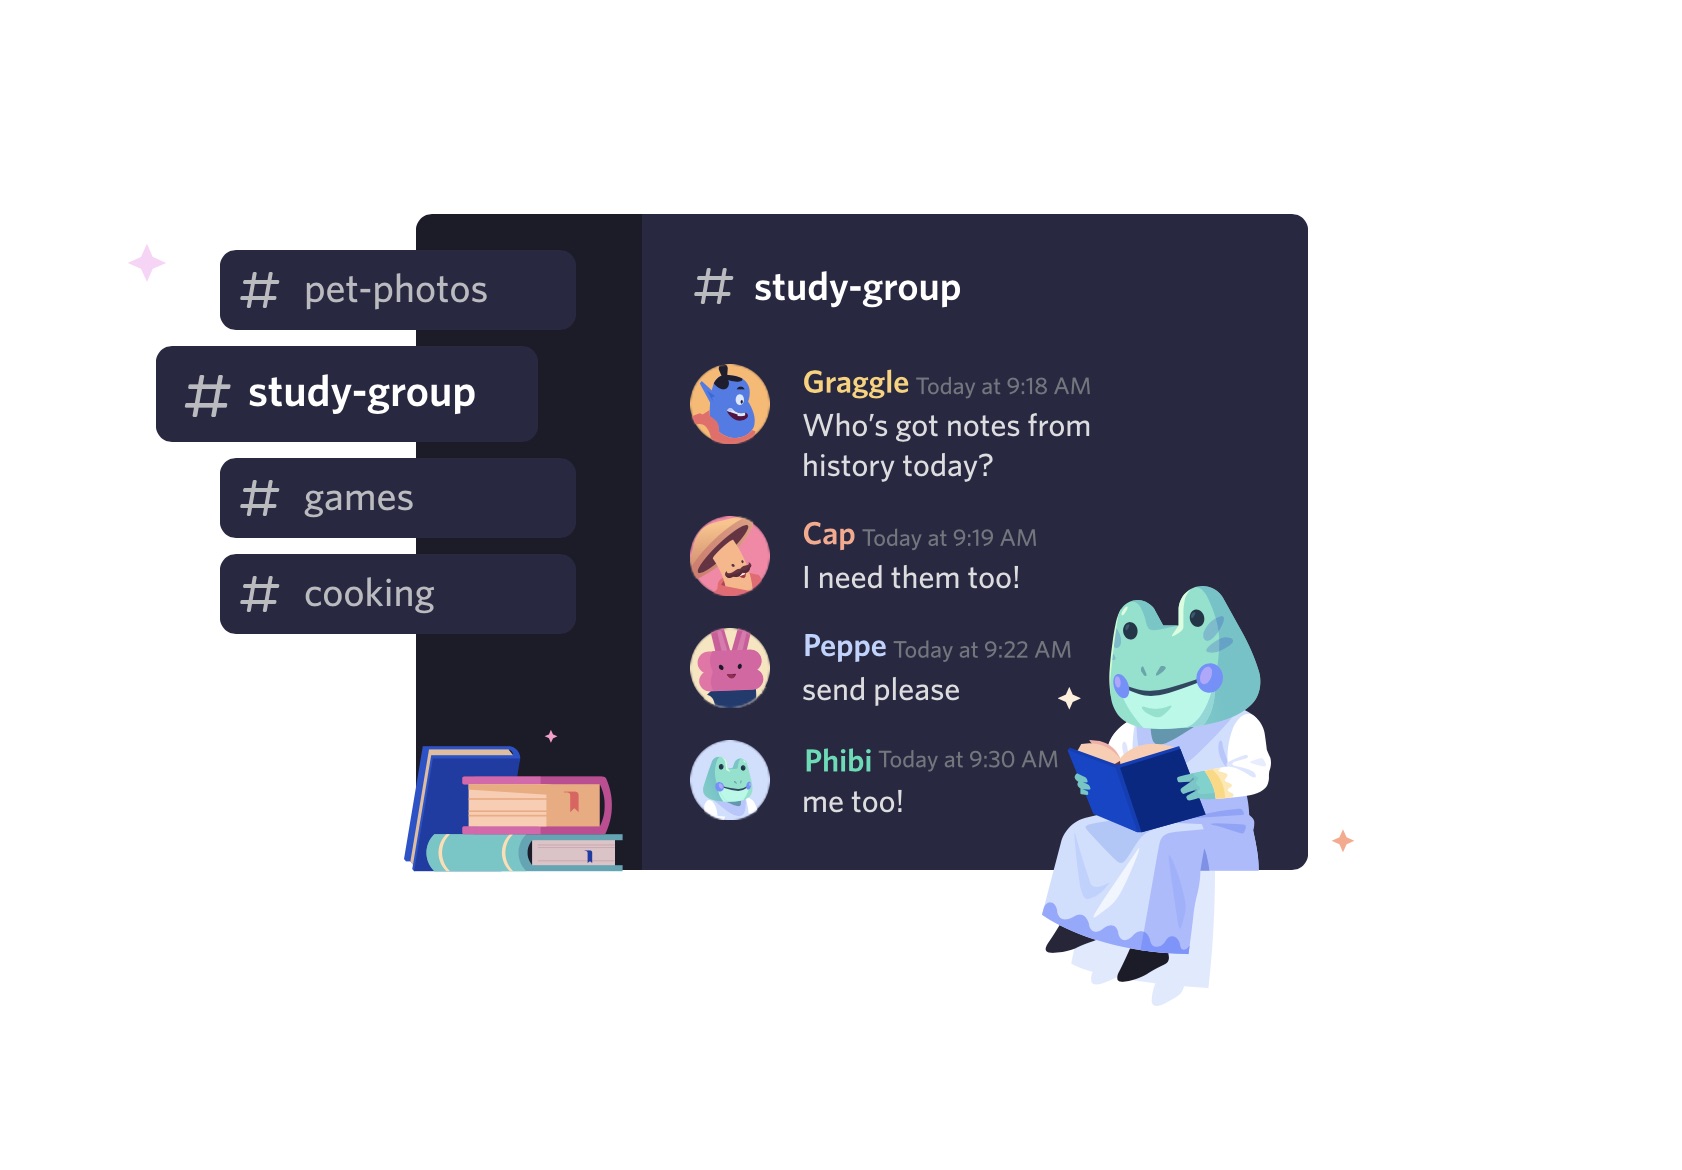 Discord's private chat server provides a virtual space for like-minded individuals to get together and chat.